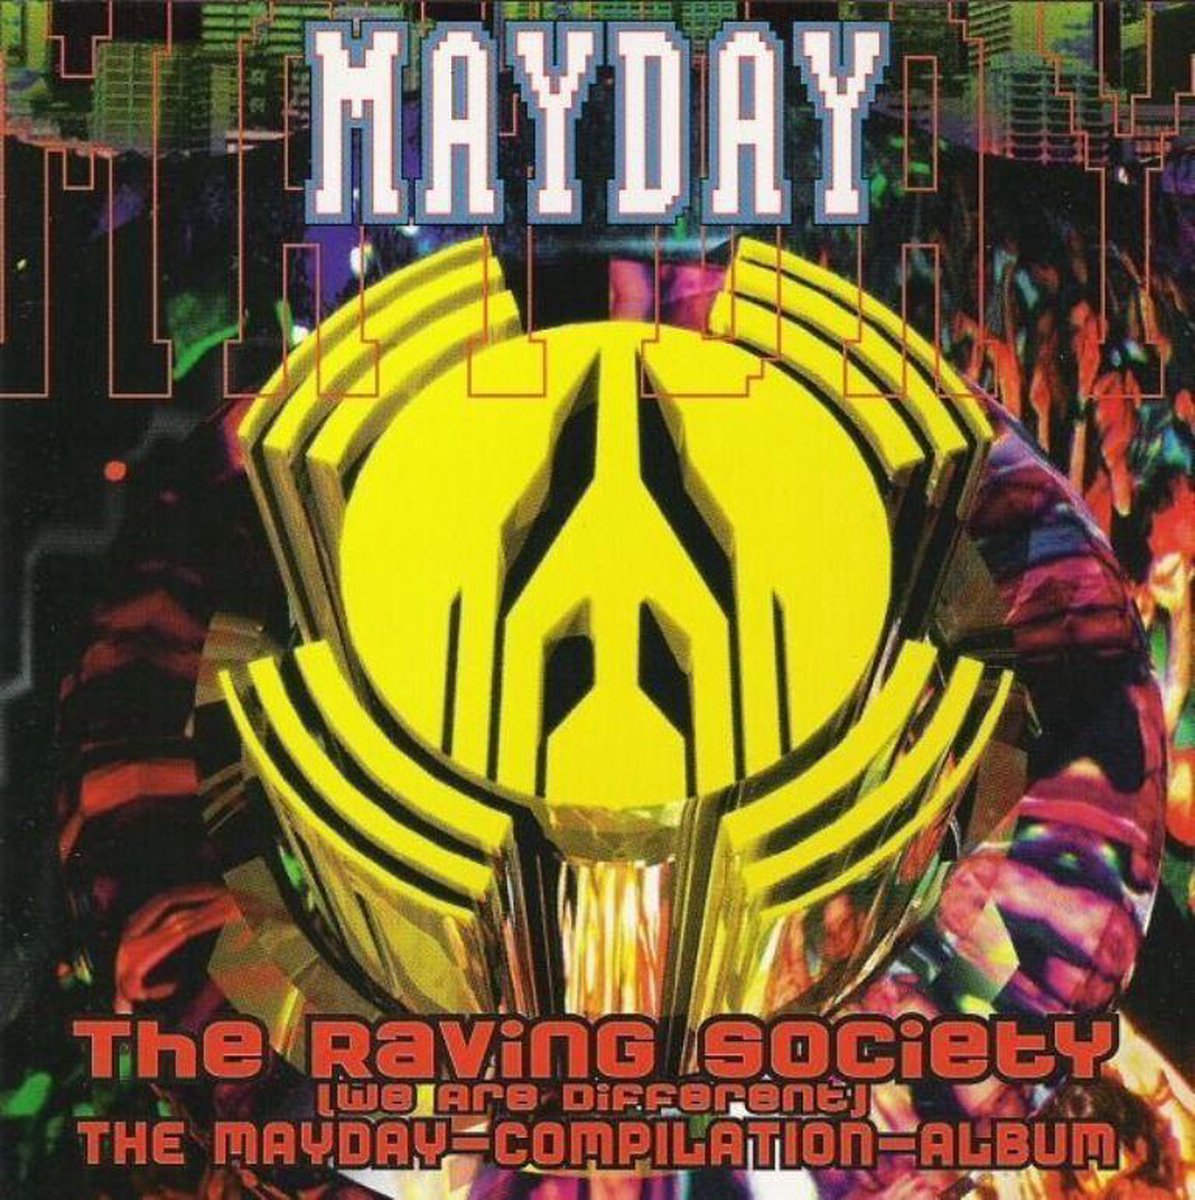 Mayday - The Raving Society (We Are Different) - The Mayday-Compilation-Album - Various